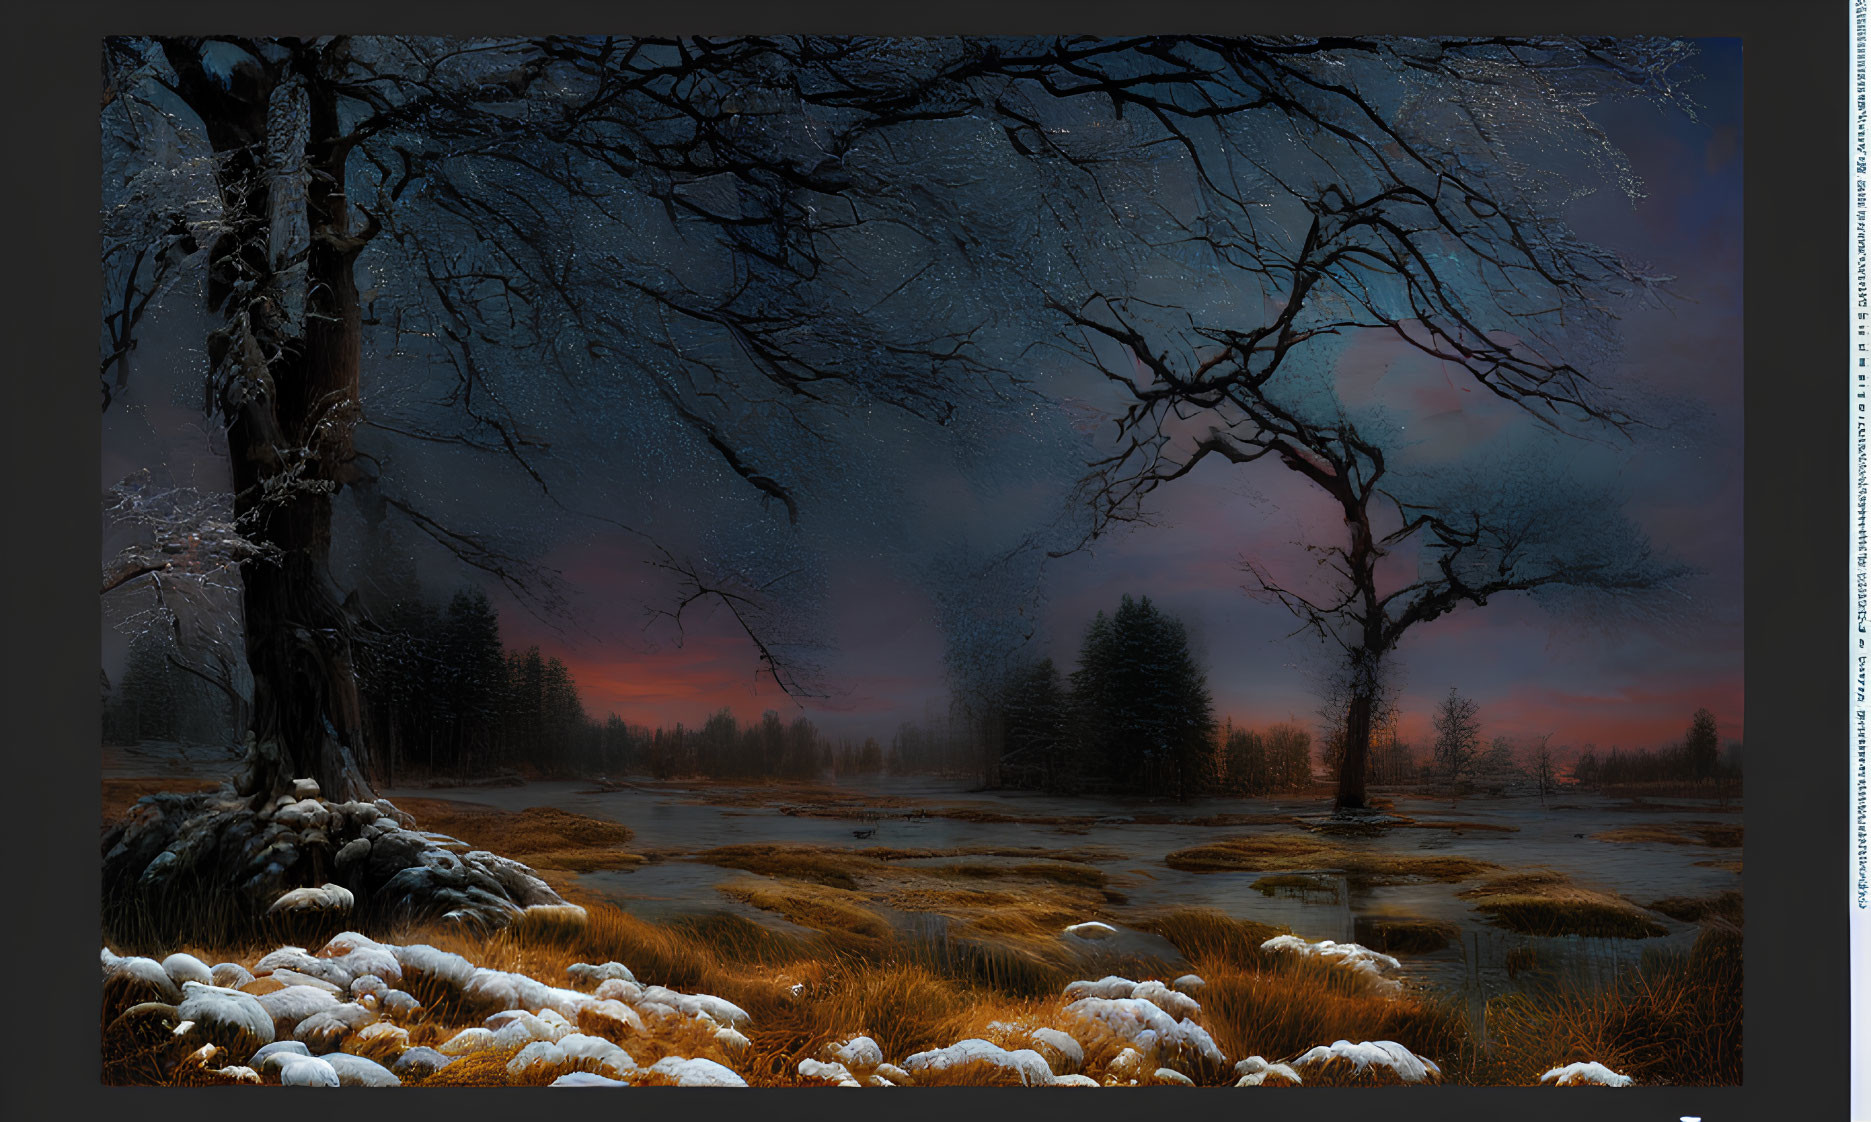 Twilight scene with silhouetted trees and snowy ground